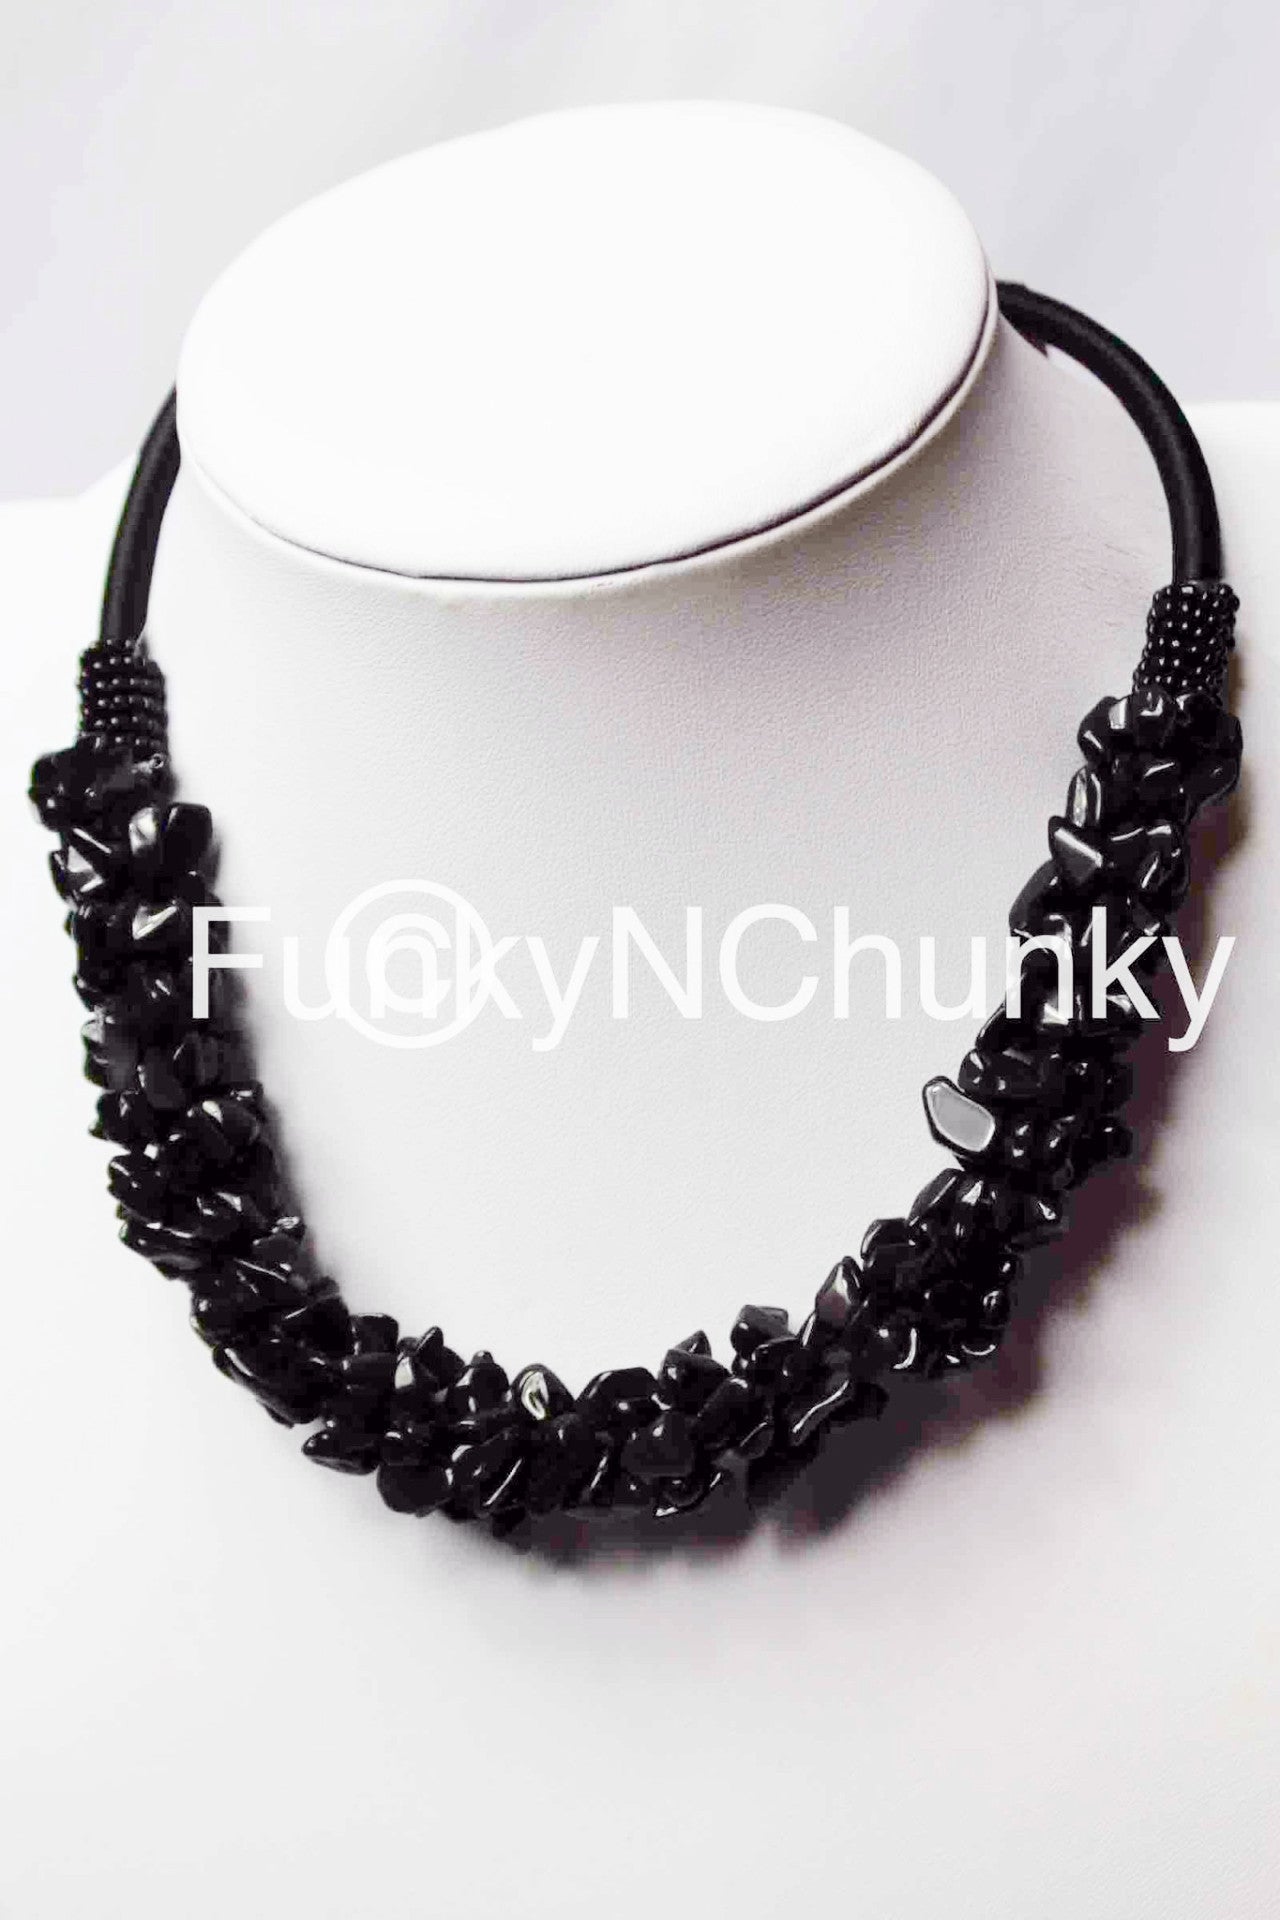 Black coral style statement necklace